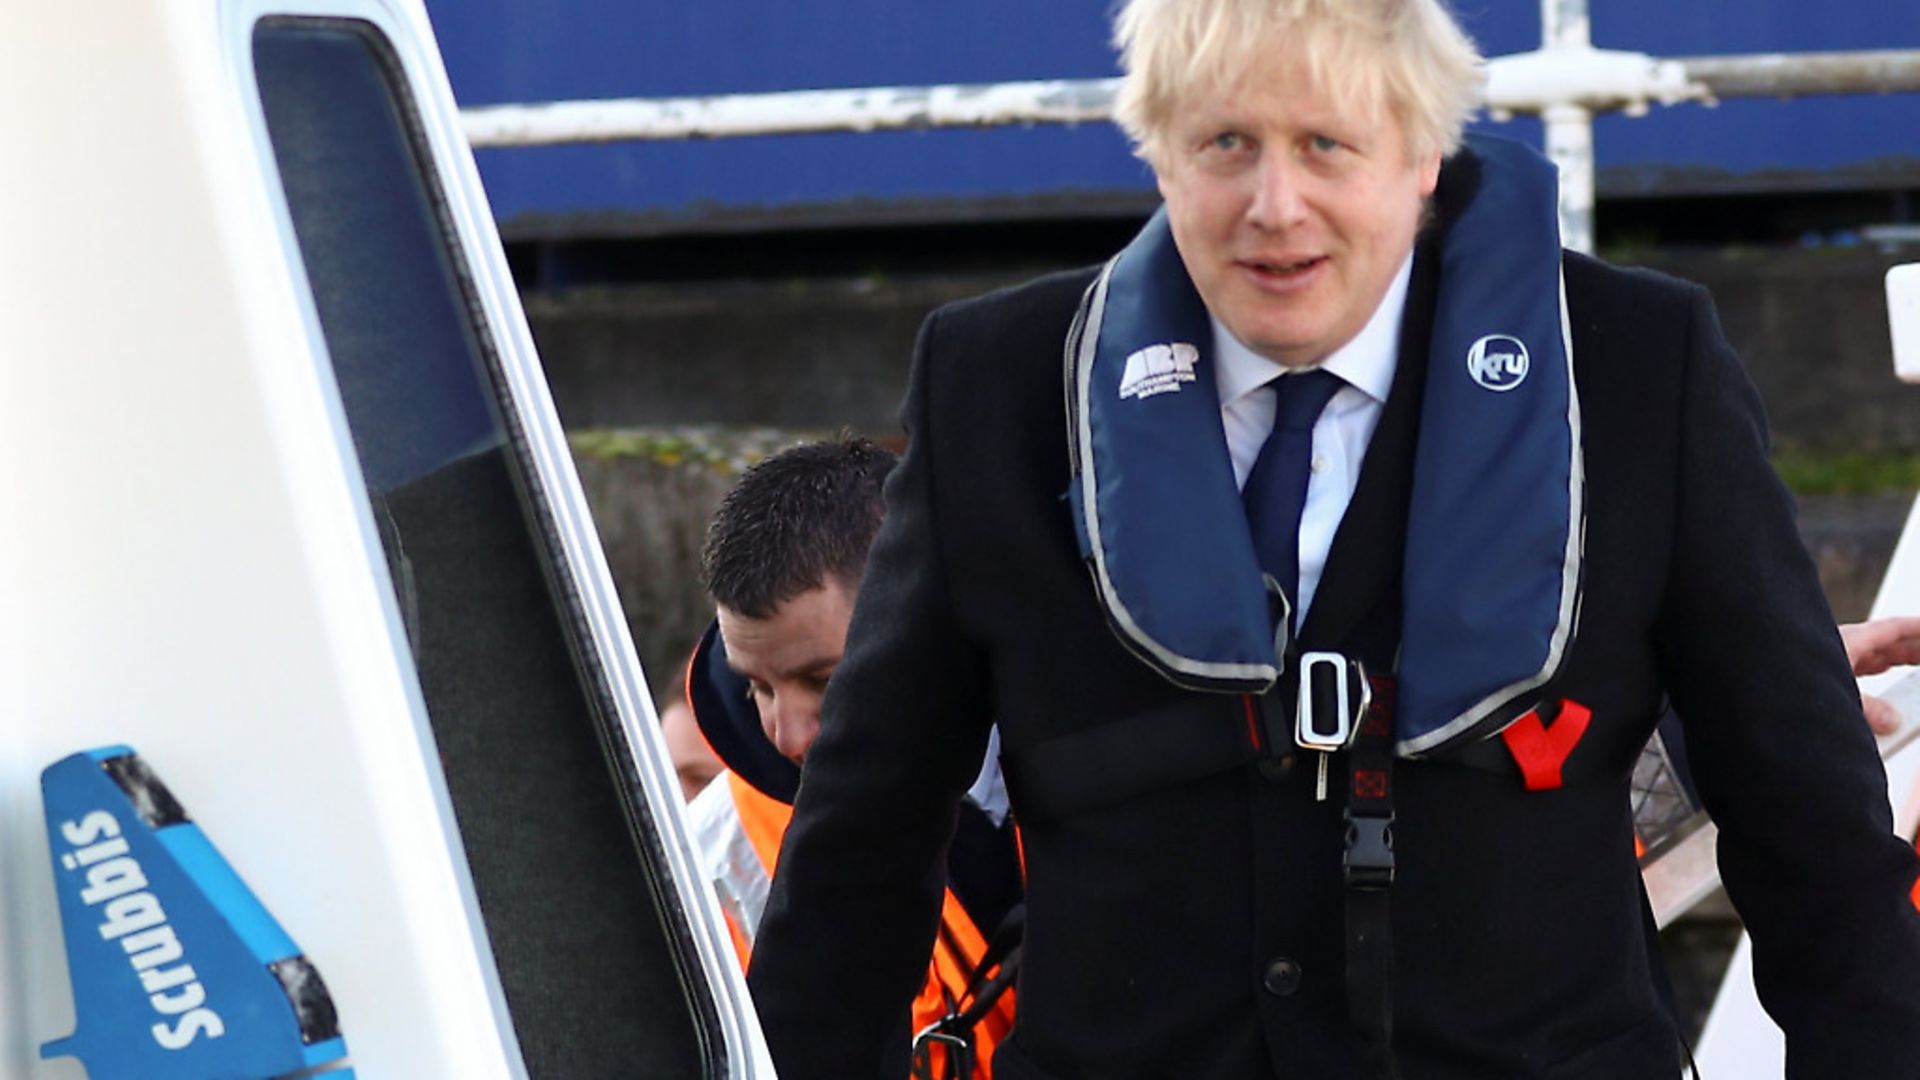 Prime Minister Boris Johnson boards a security vessel at the Port of Southampton. Picture: Getty Images - Credit: Getty Images